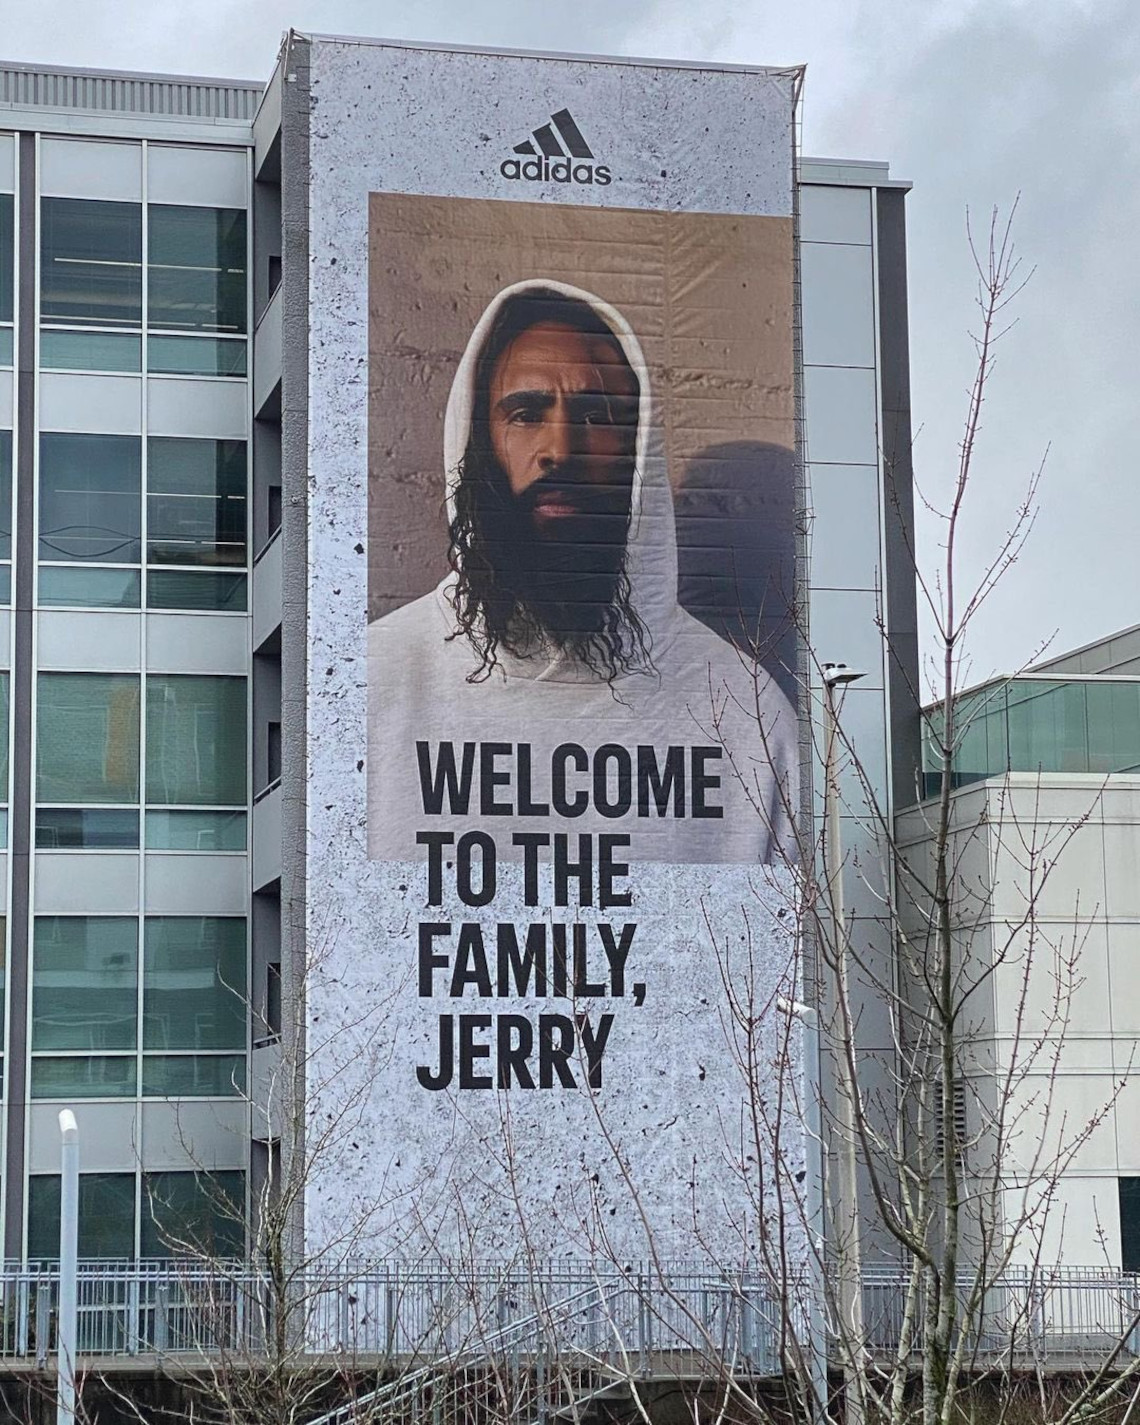 Welcome Jerry Outdoor adidas